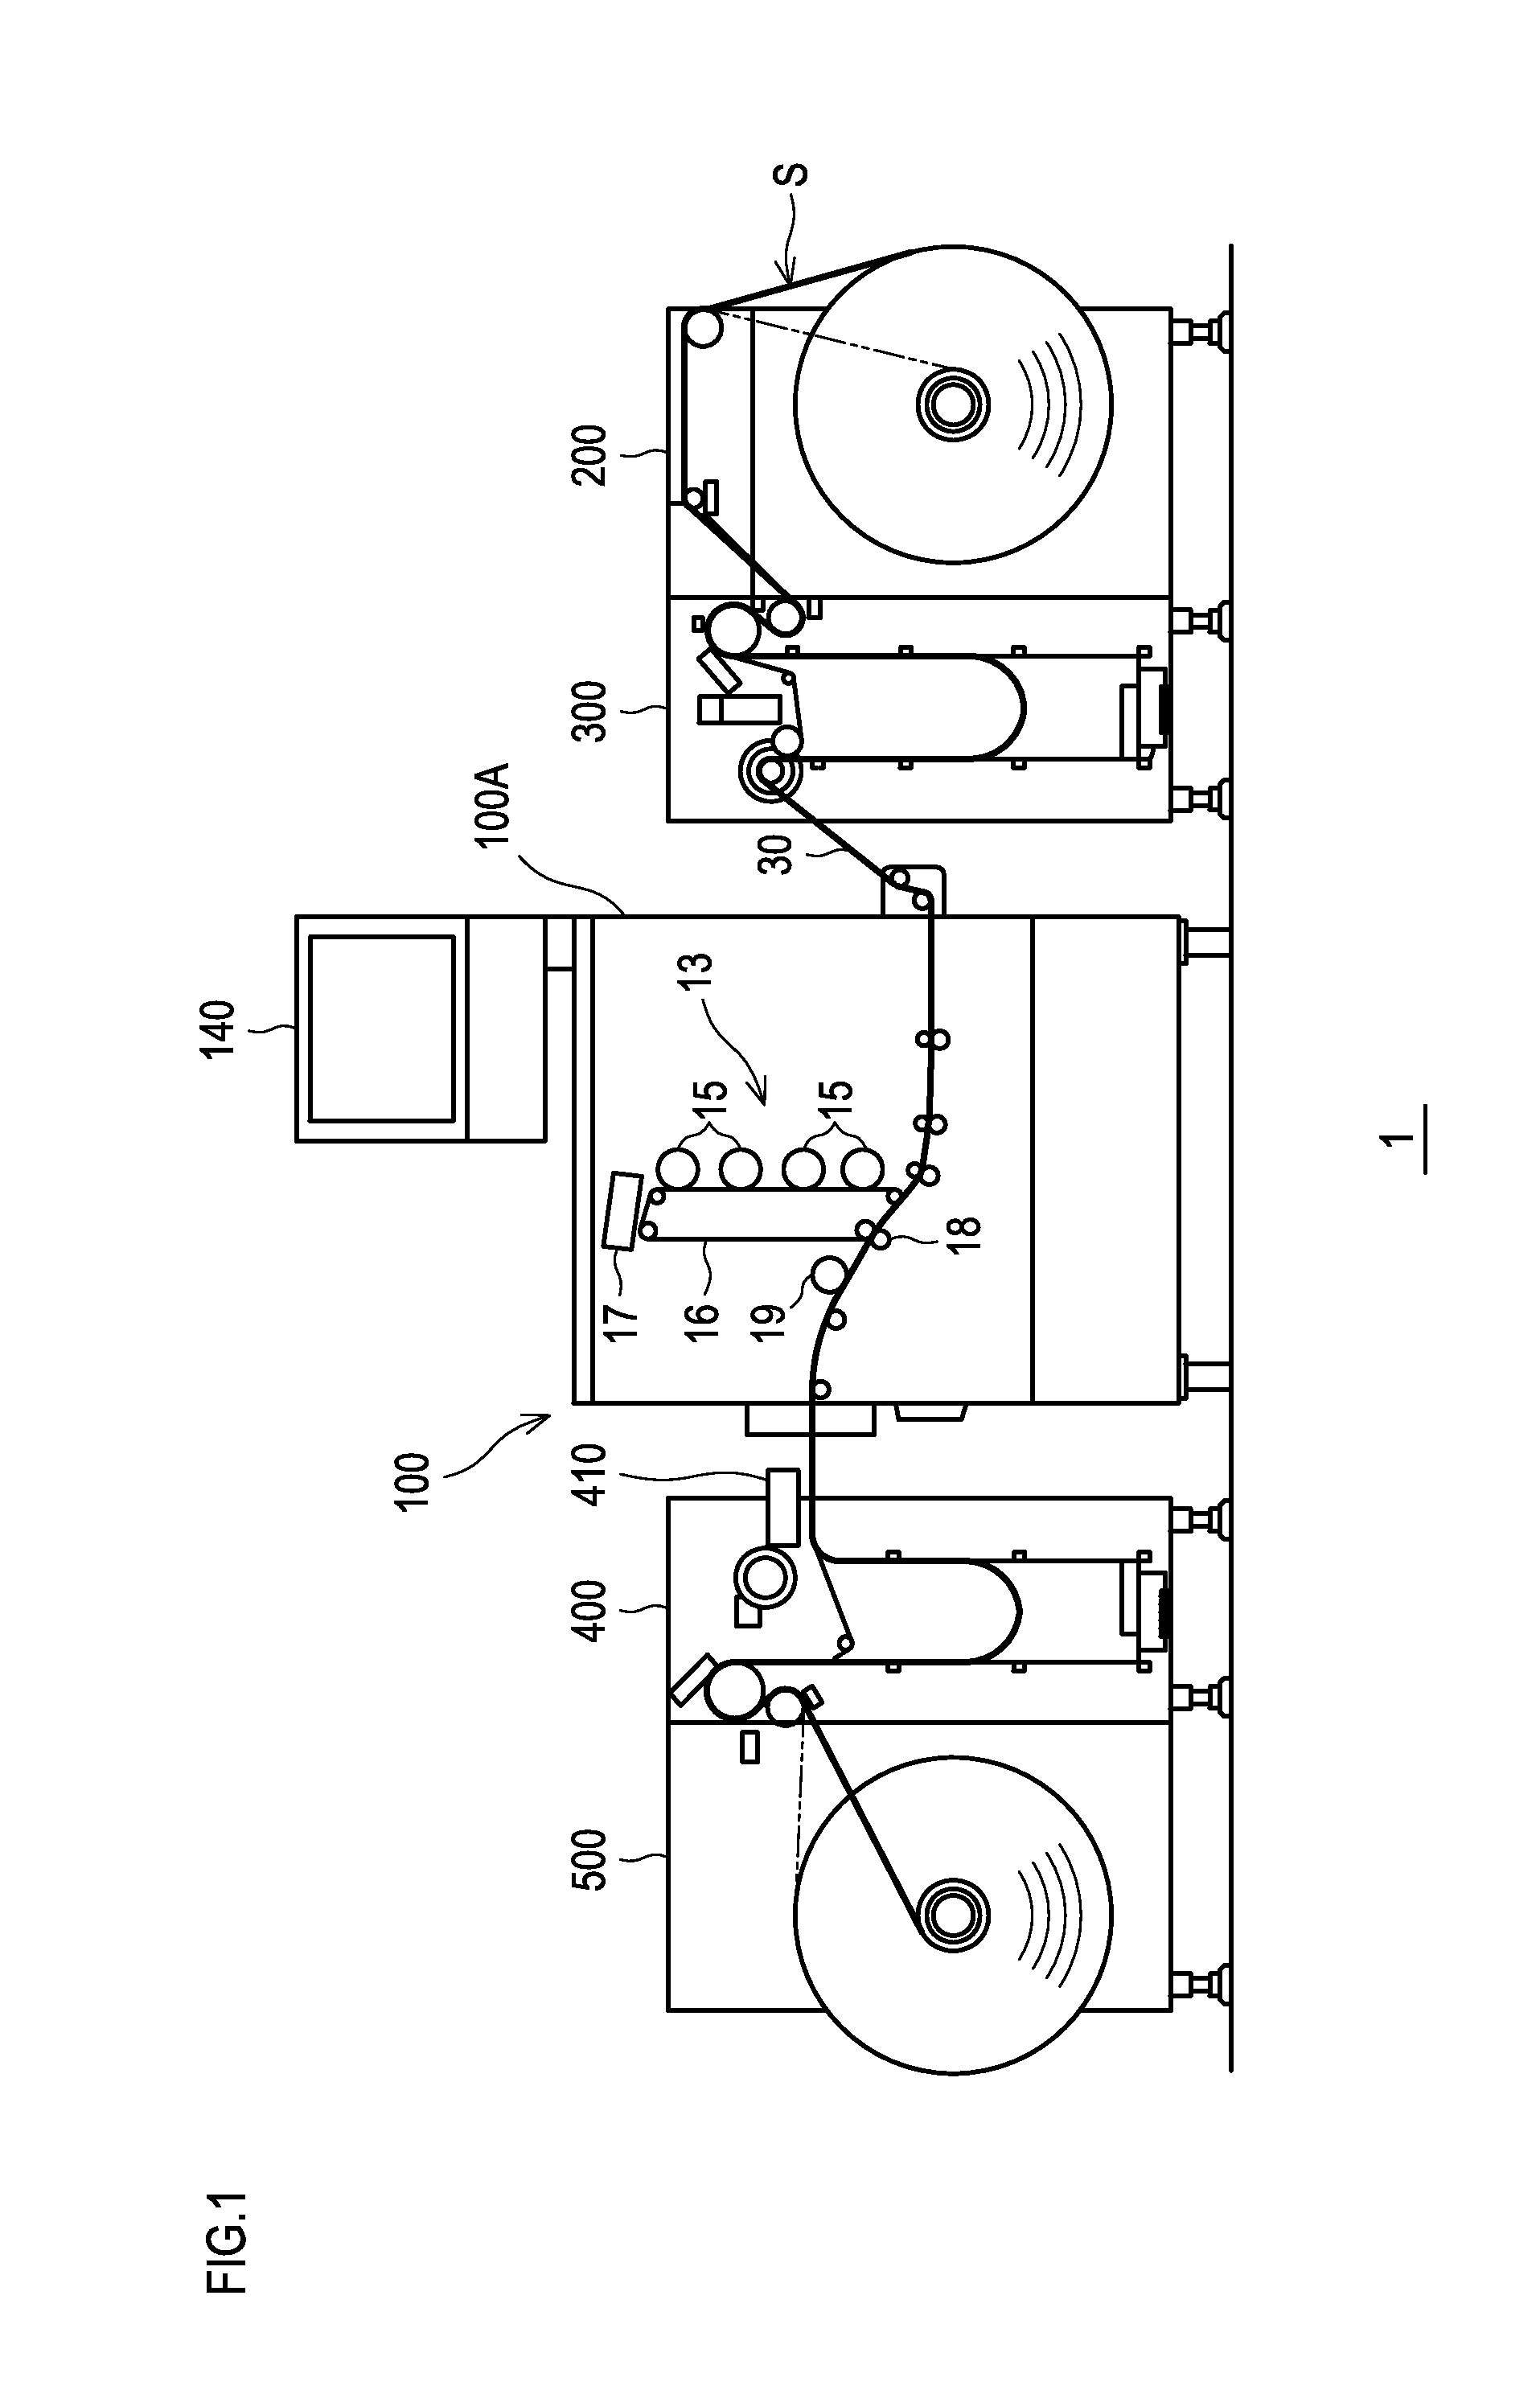 Image forming apparatus, image forming system and image forming maintenance method